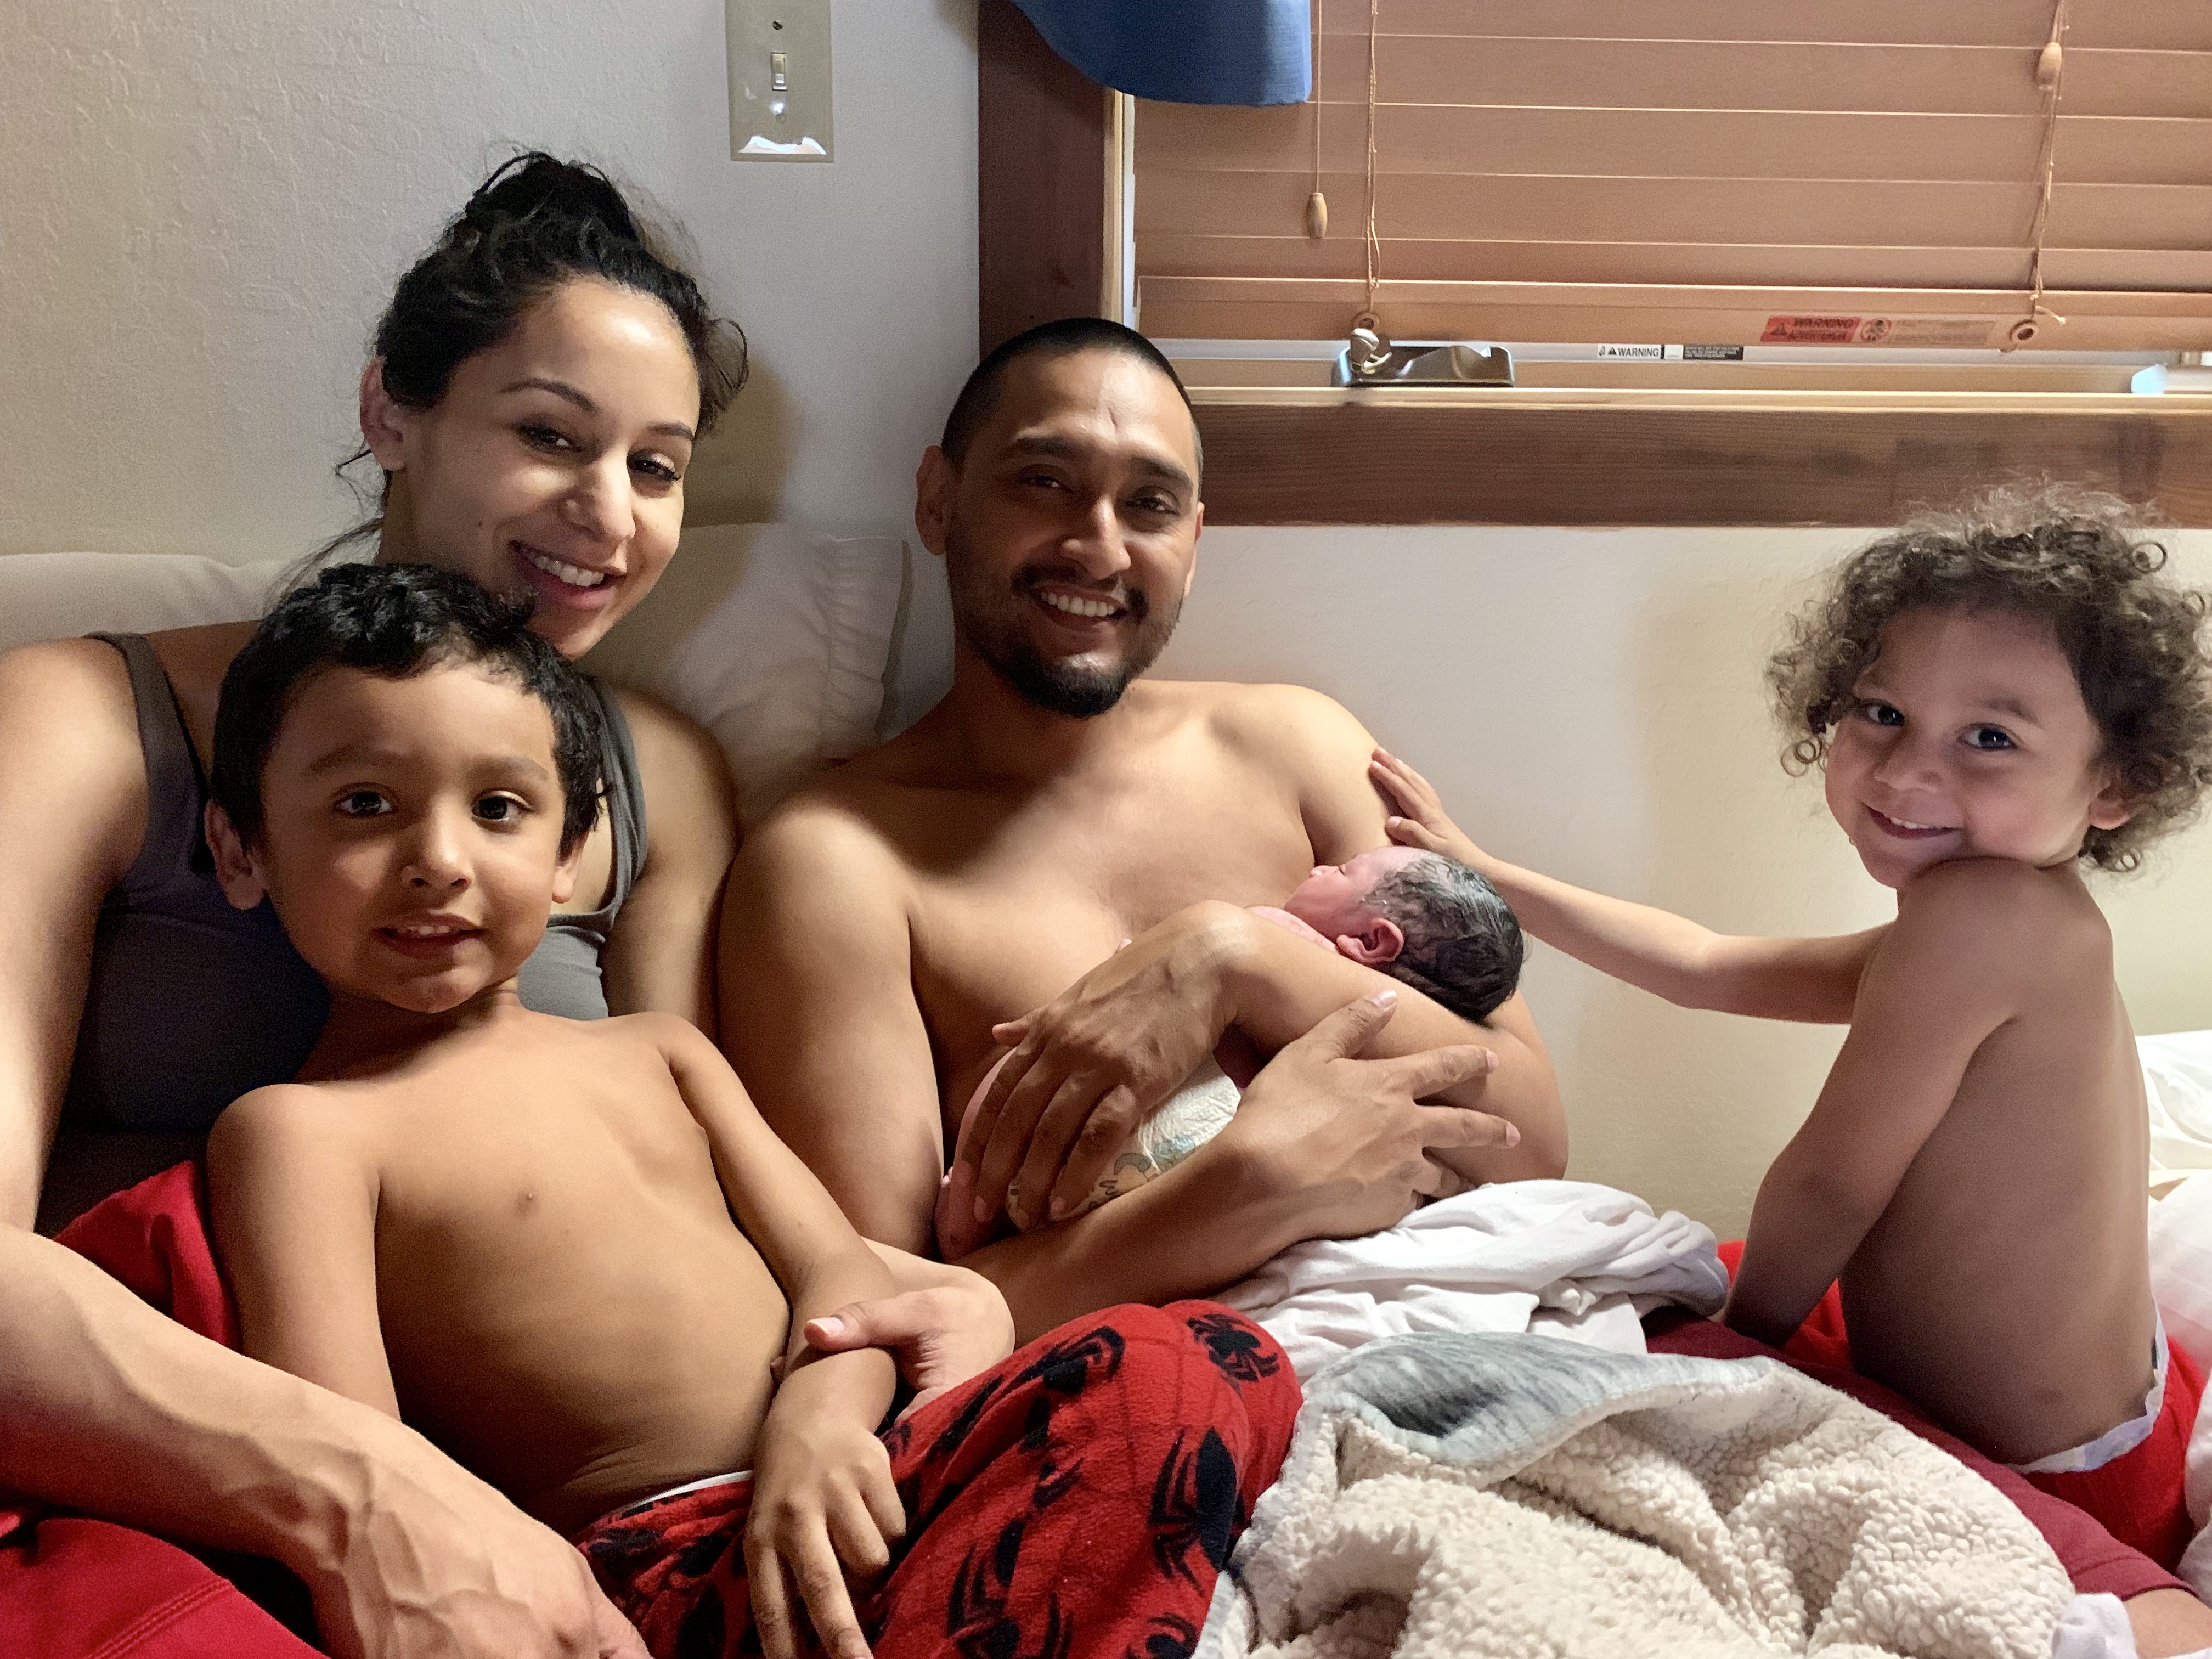 A family of five in bed together after their new baby was born